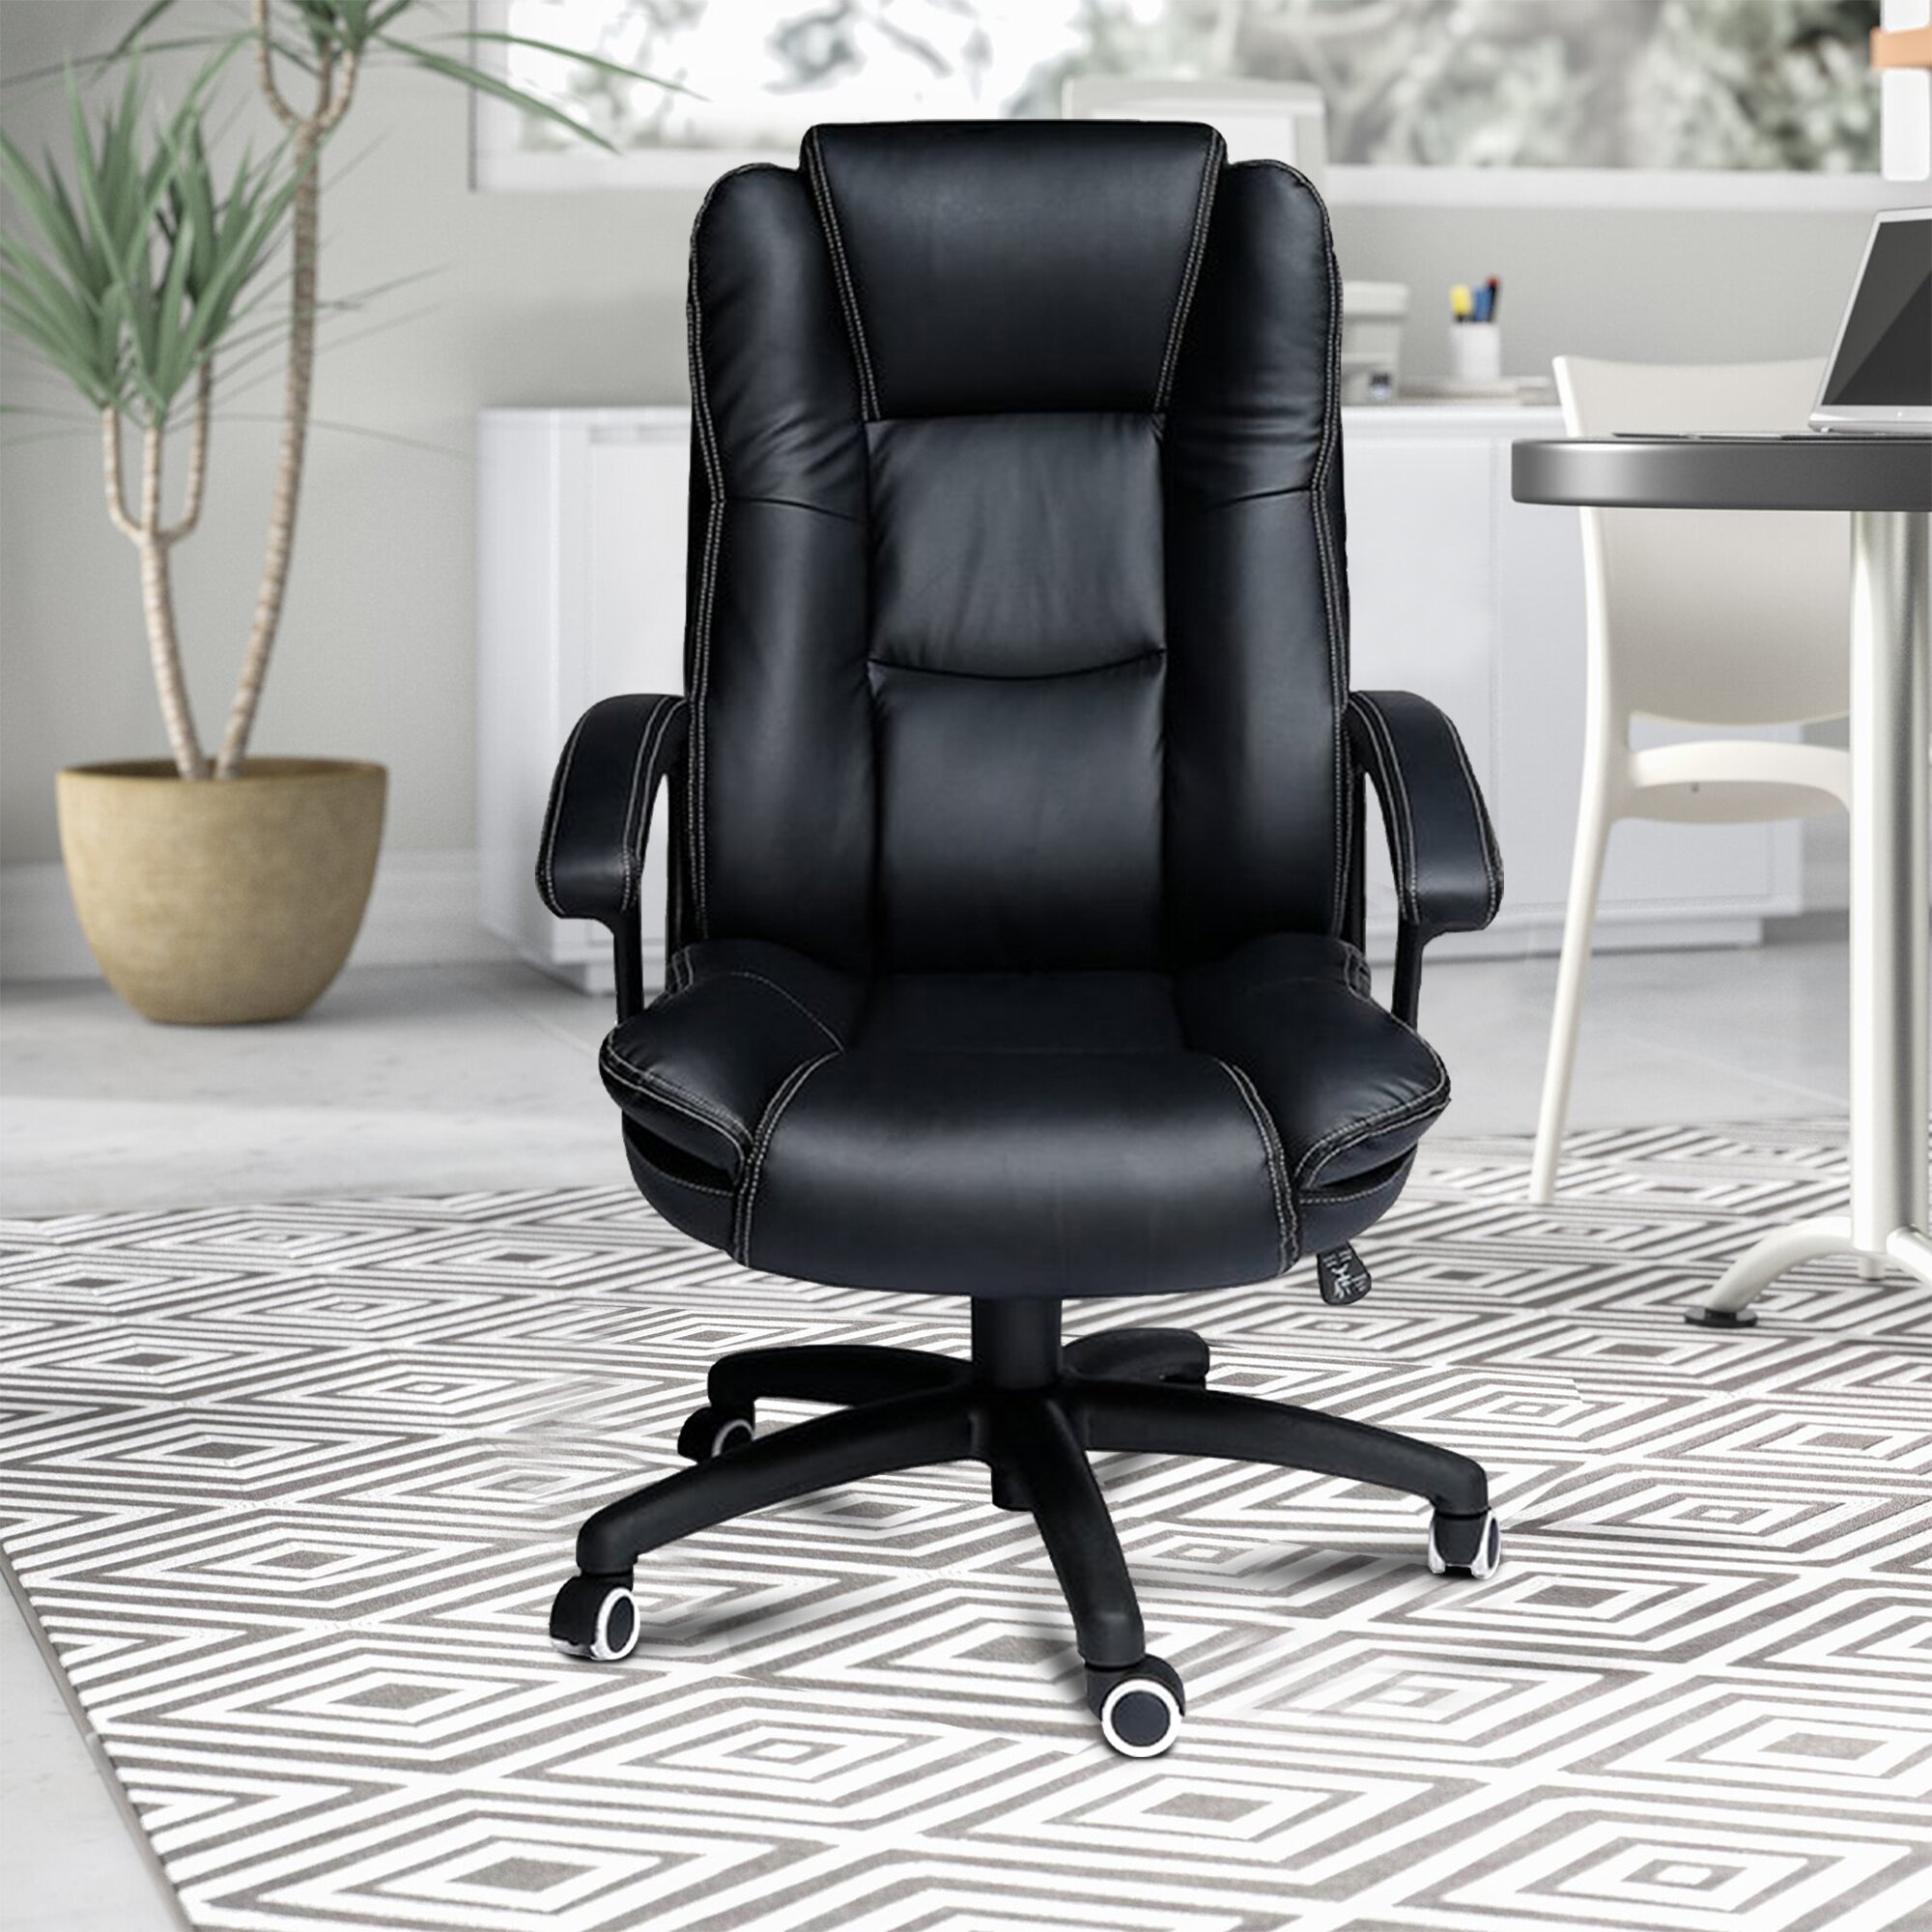 YAMASORO Recliner Office Chair High Back Executive Ergonomic Chair Footrest 